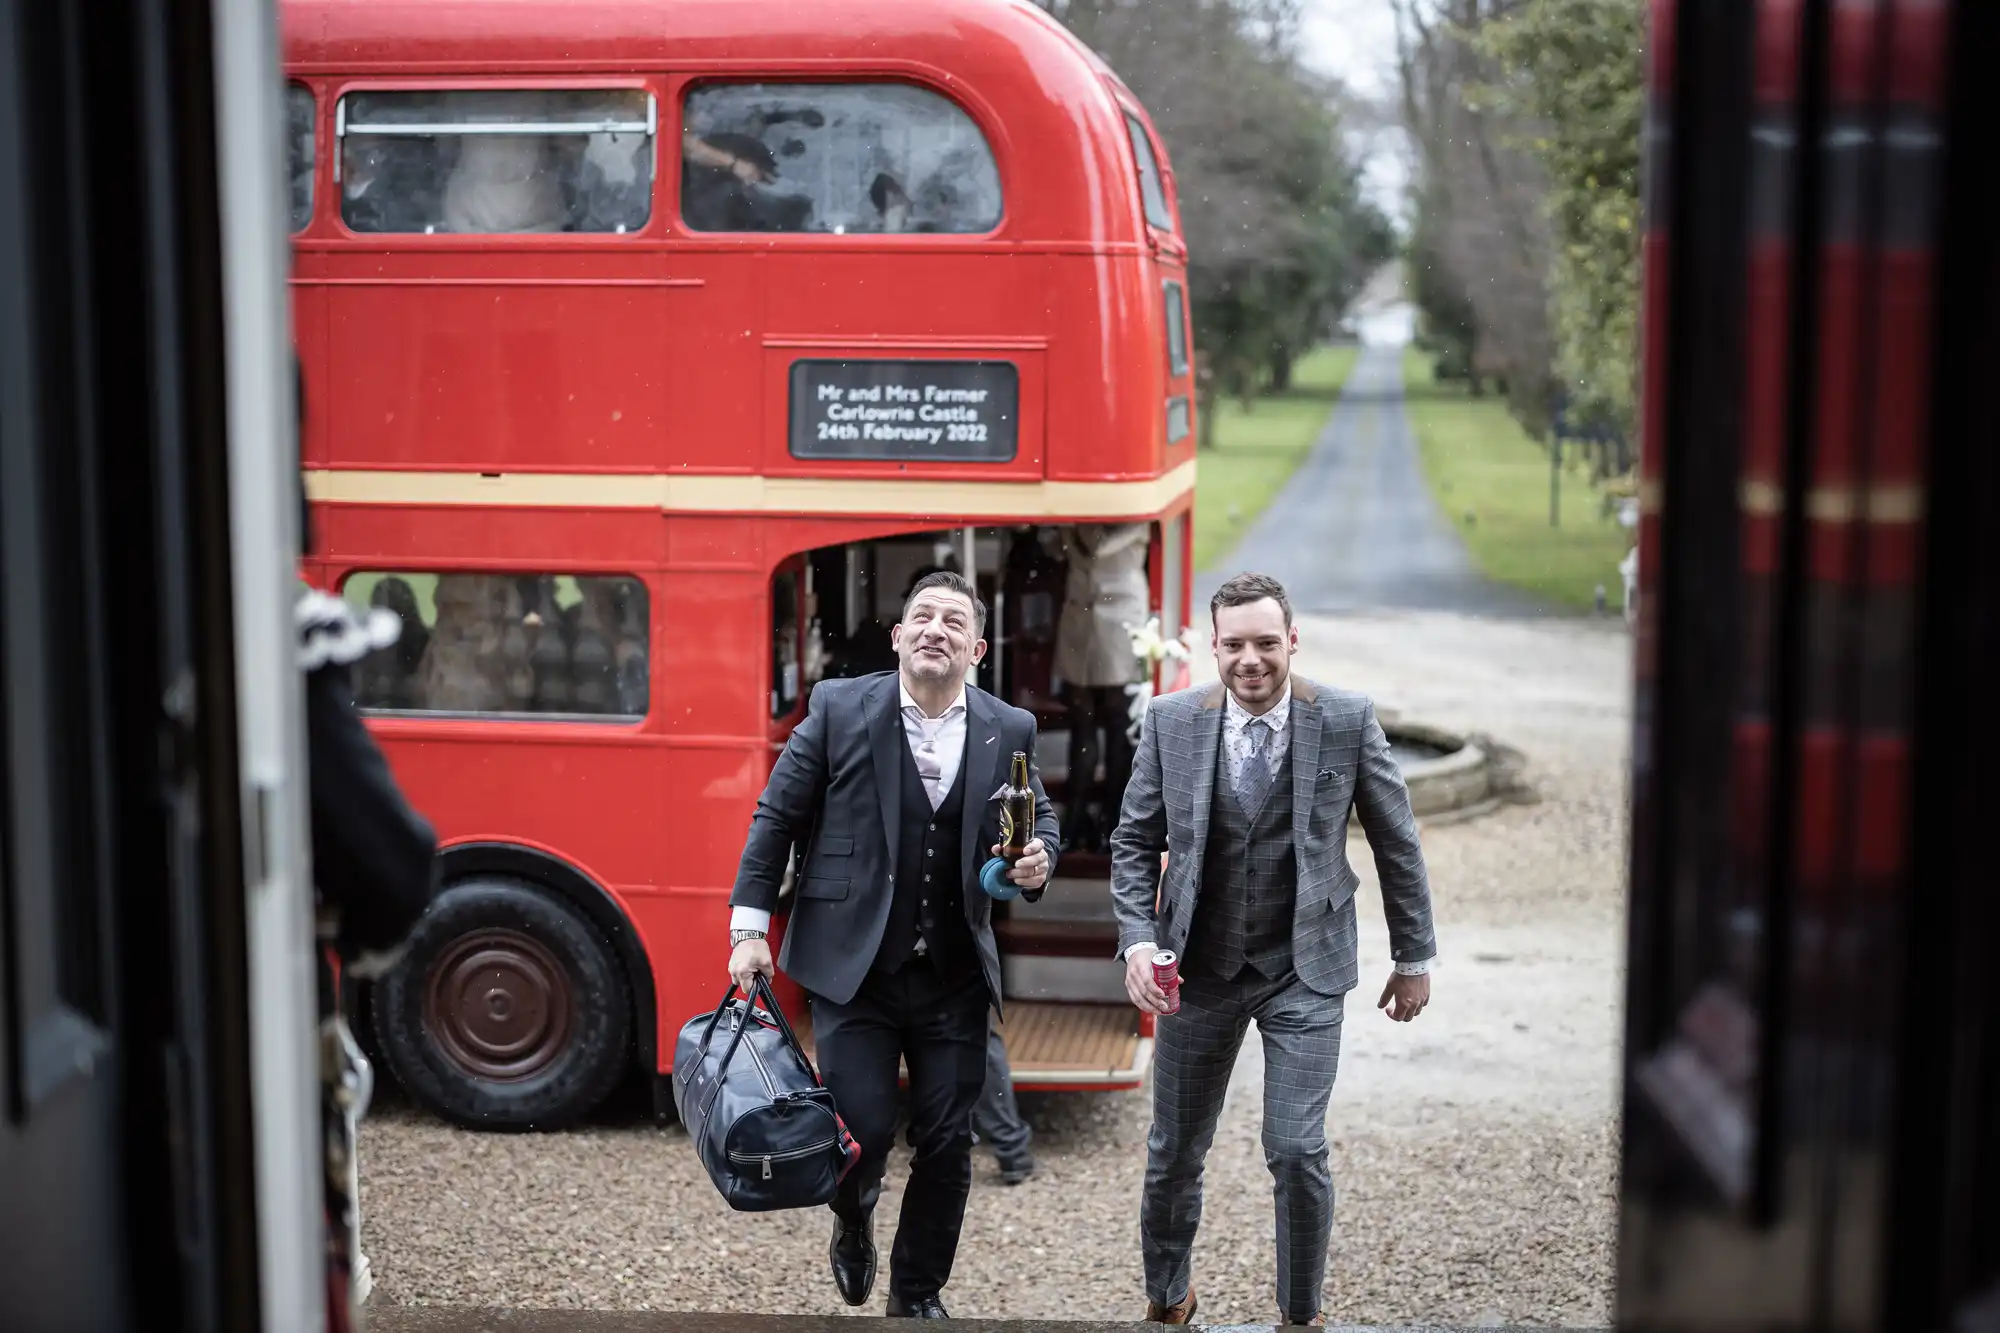 Two men in suits walk towards the camera, carrying luggage, with a red double-decker bus parked behind them. The scene appears to be outdoors with a gravel path and greenery in the background.